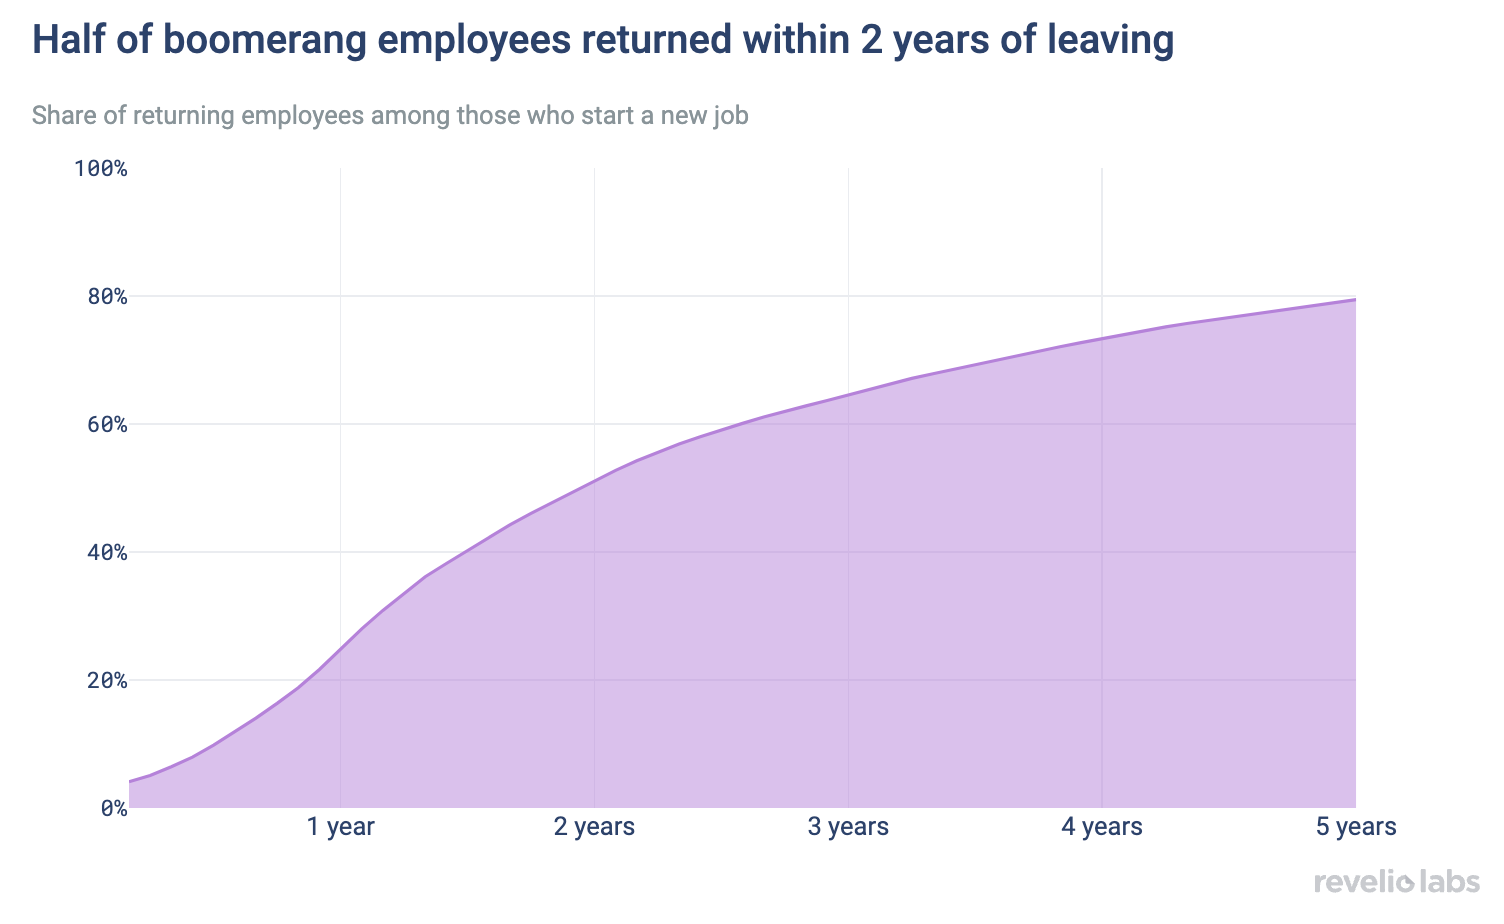 Half of boomerang employees returned within 2 years of leaving